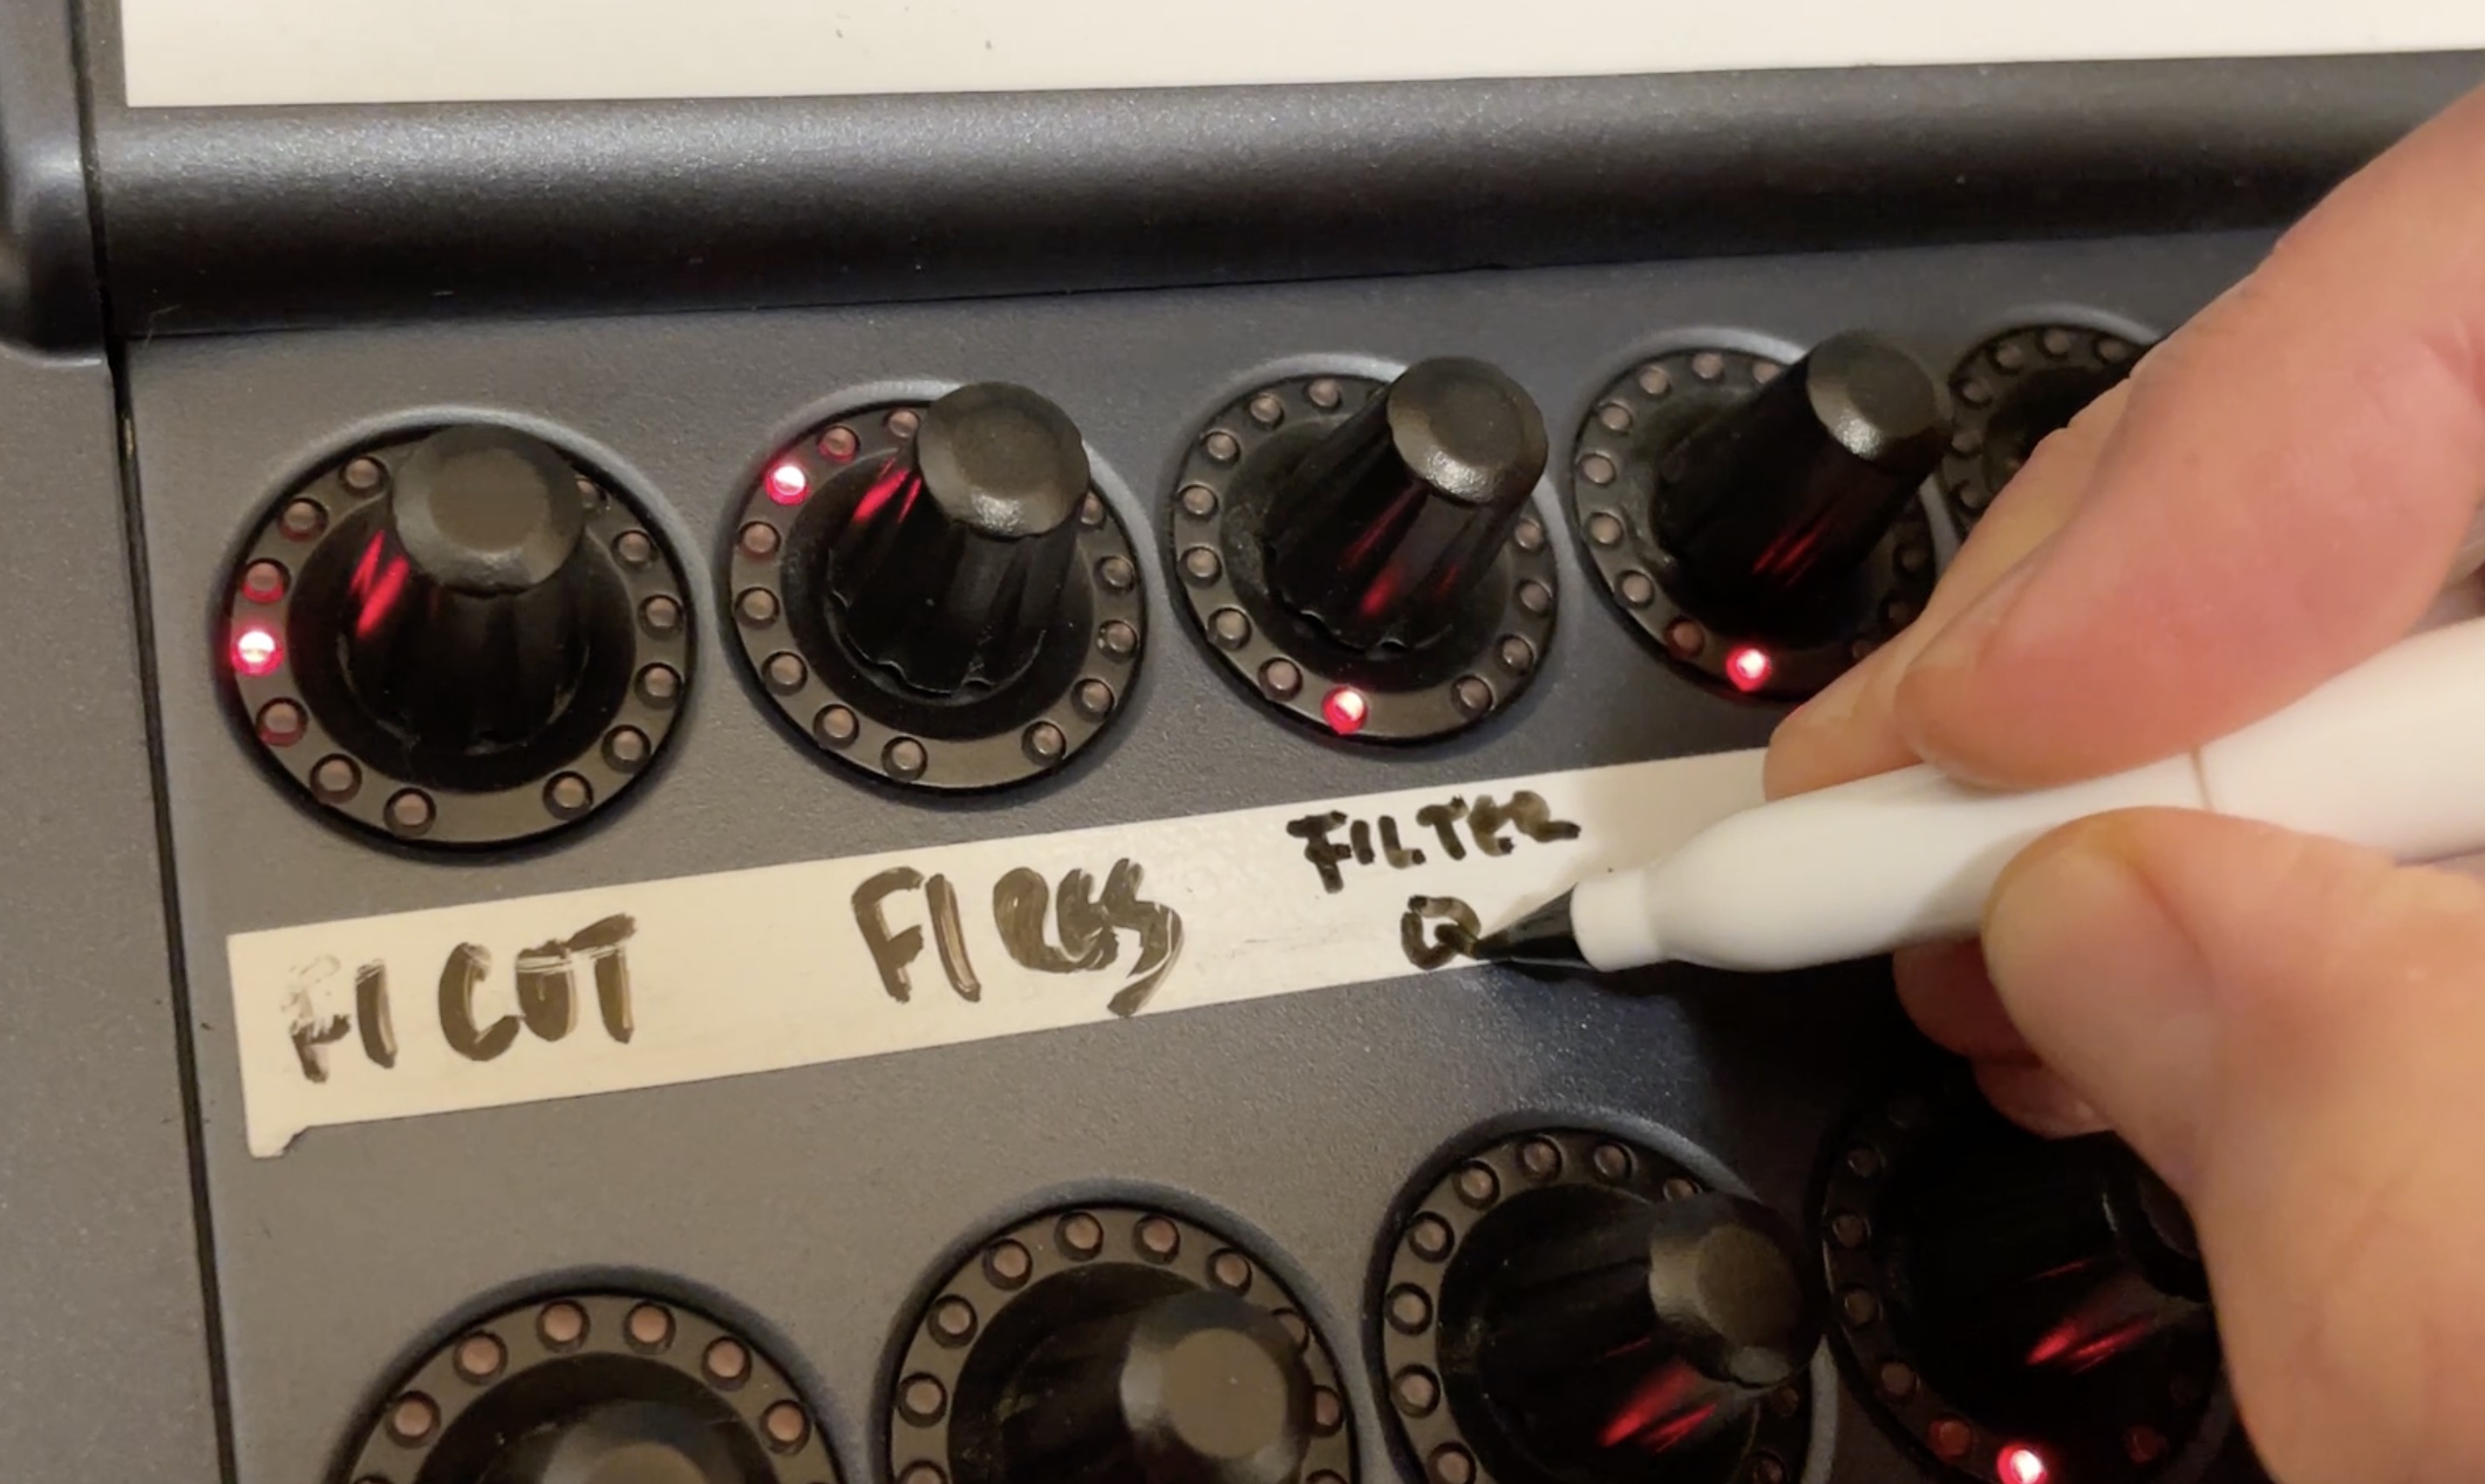 Labeling BCR-2000 knobs with a dry-erase pen.